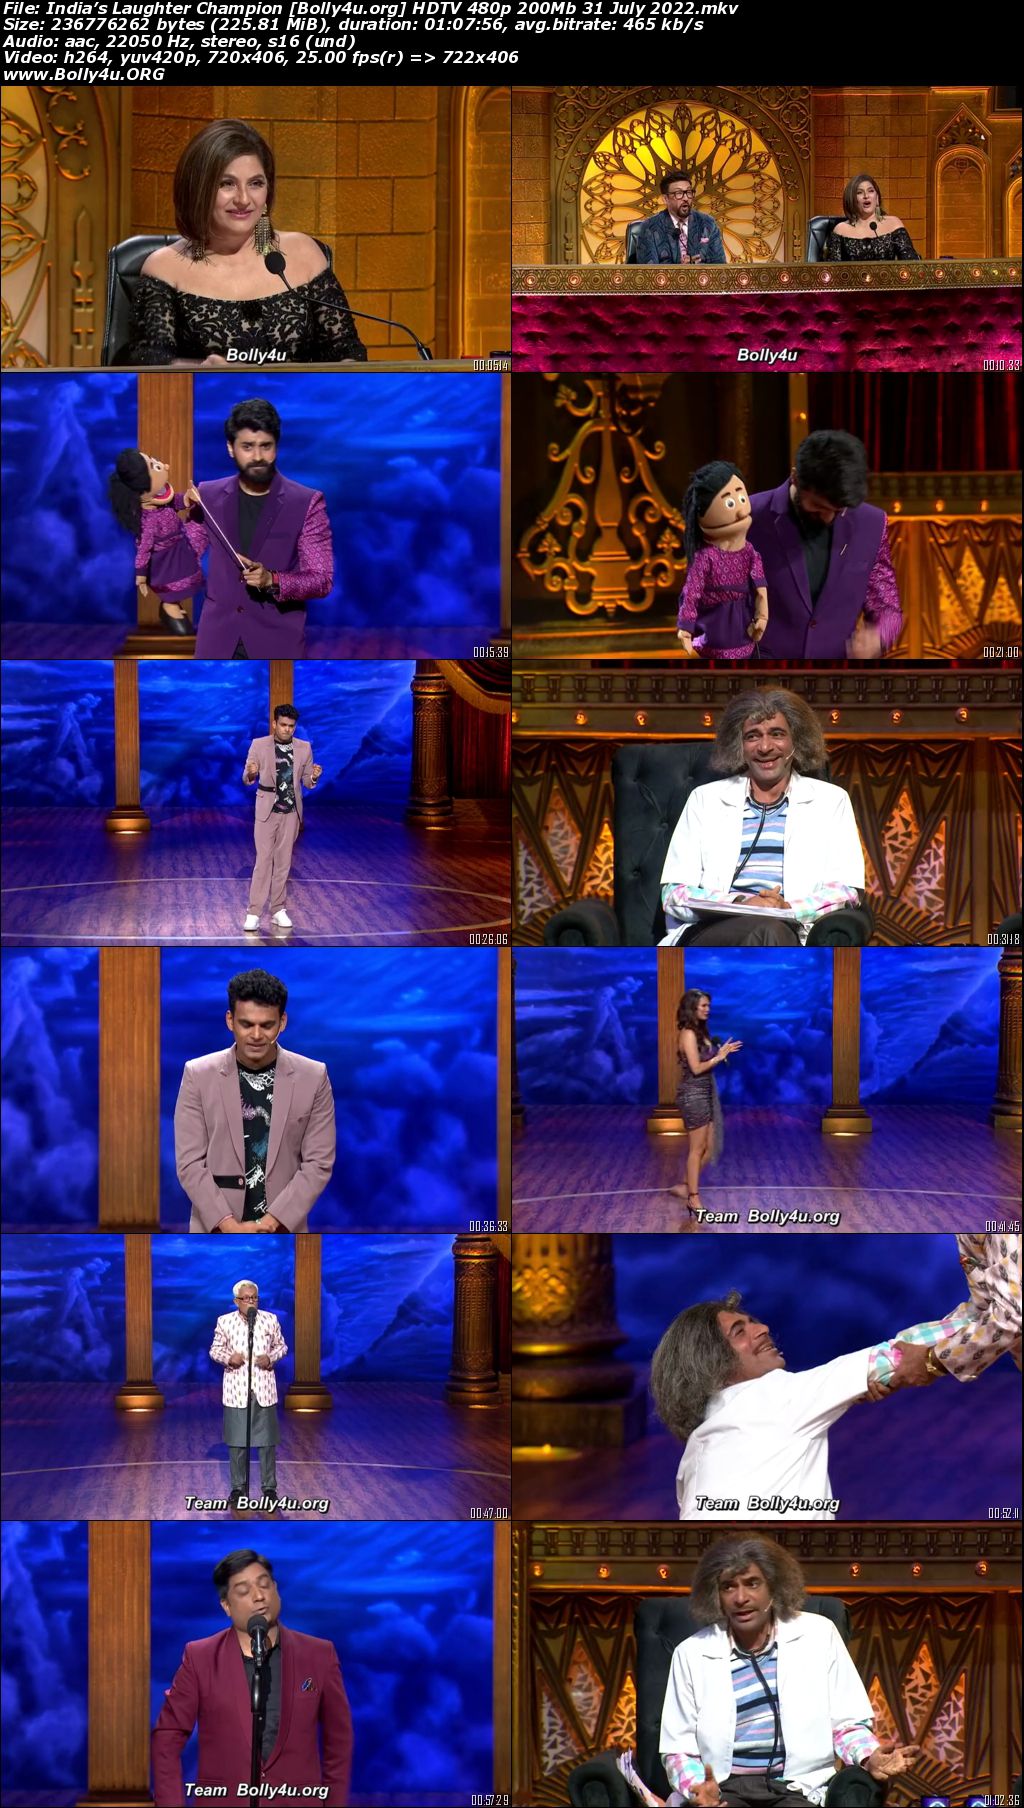 Indias Laughter Champion HDTV 480p 200Mb 31 July 2022 Download